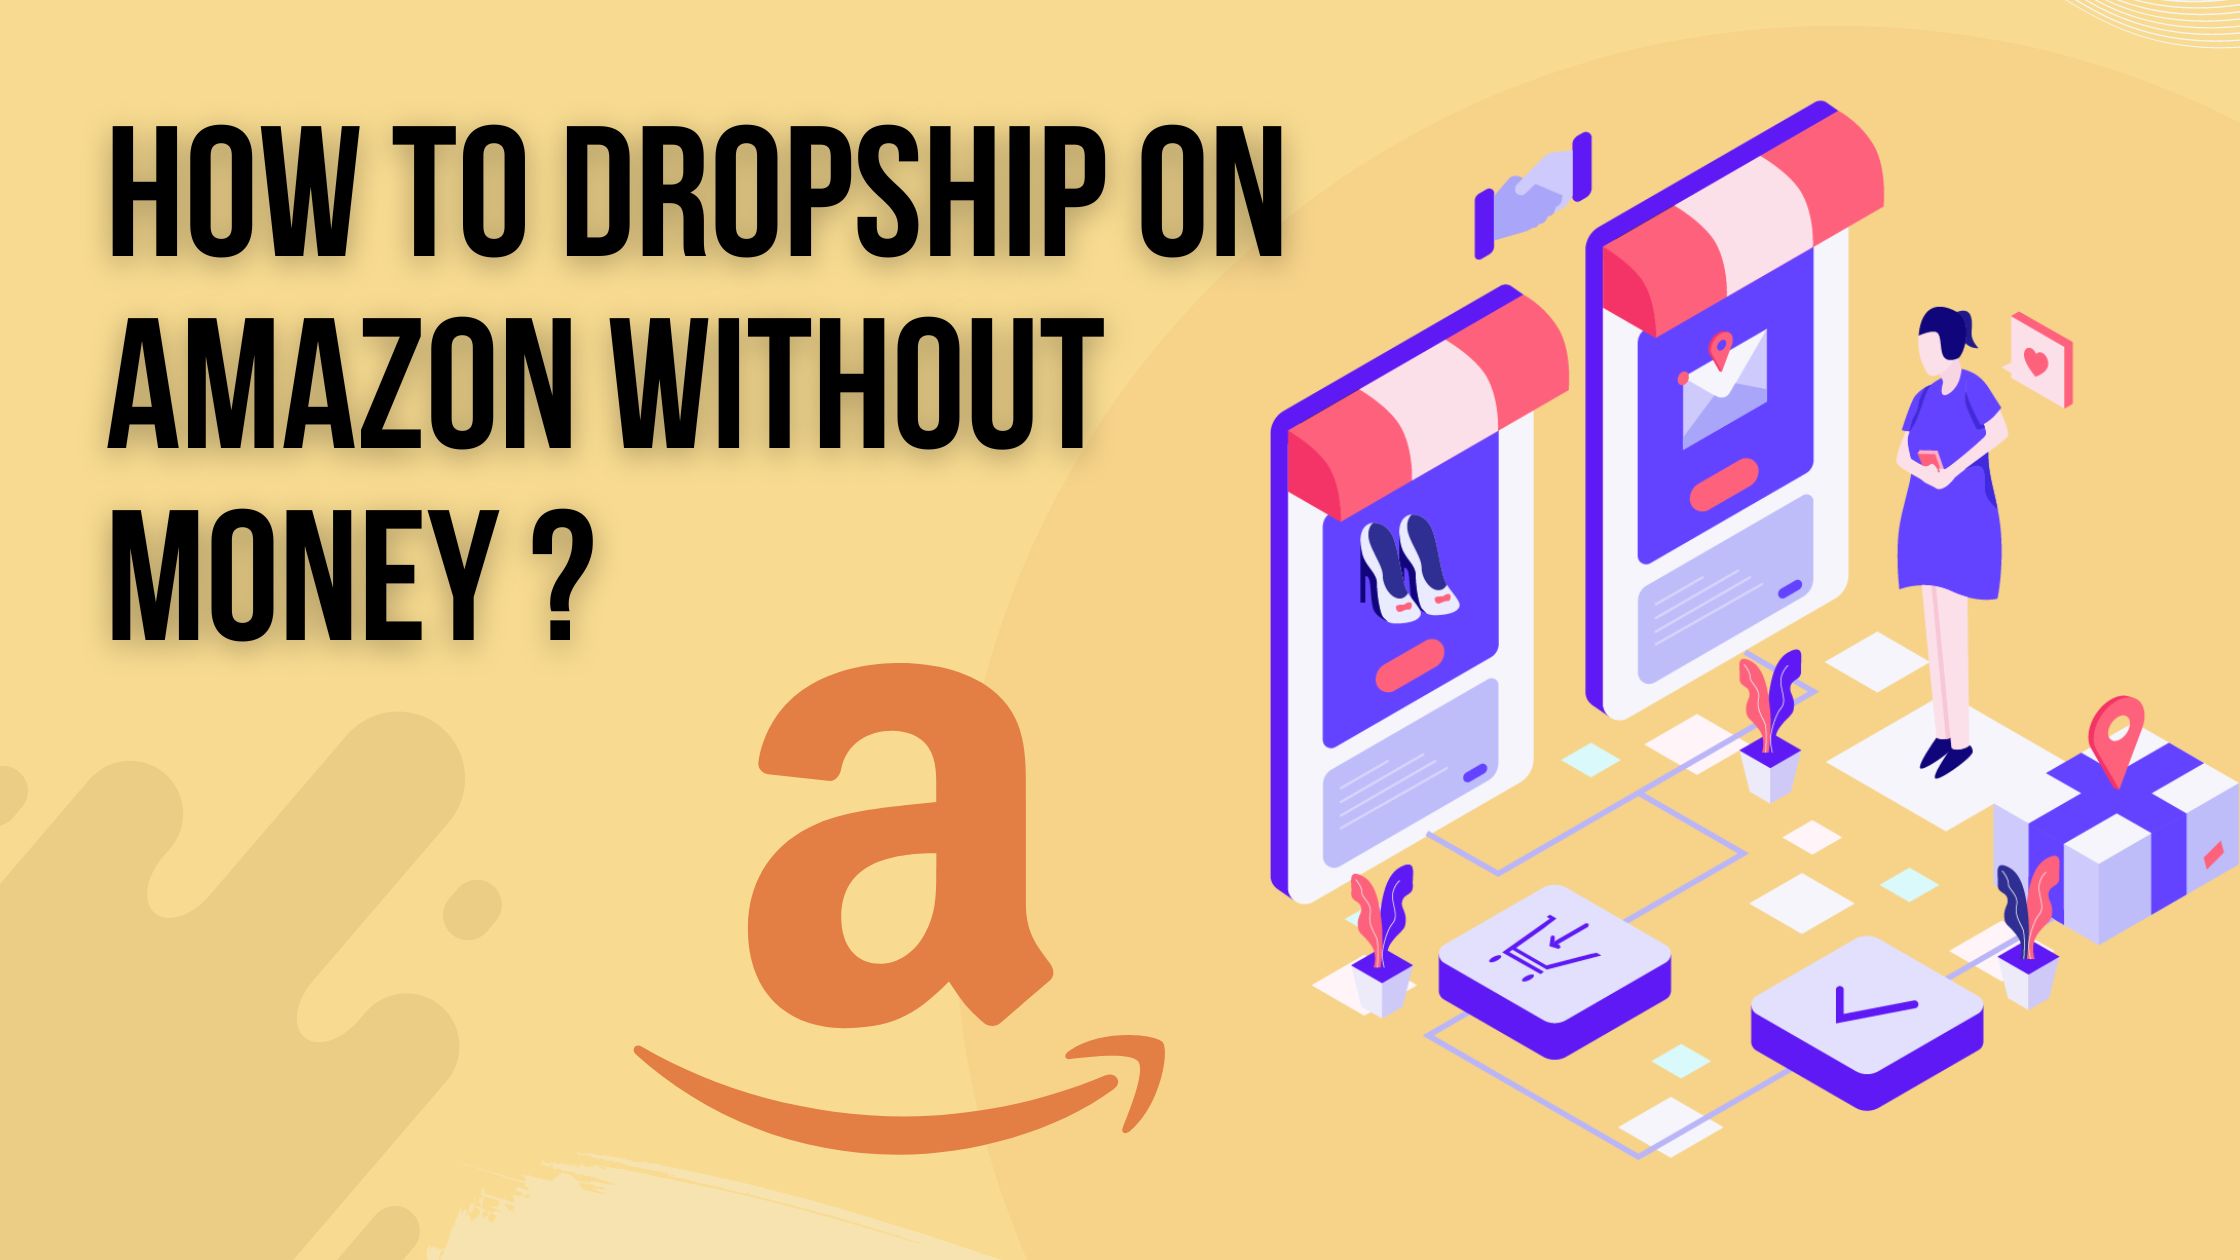 How to Dropship on Amazon Without Money